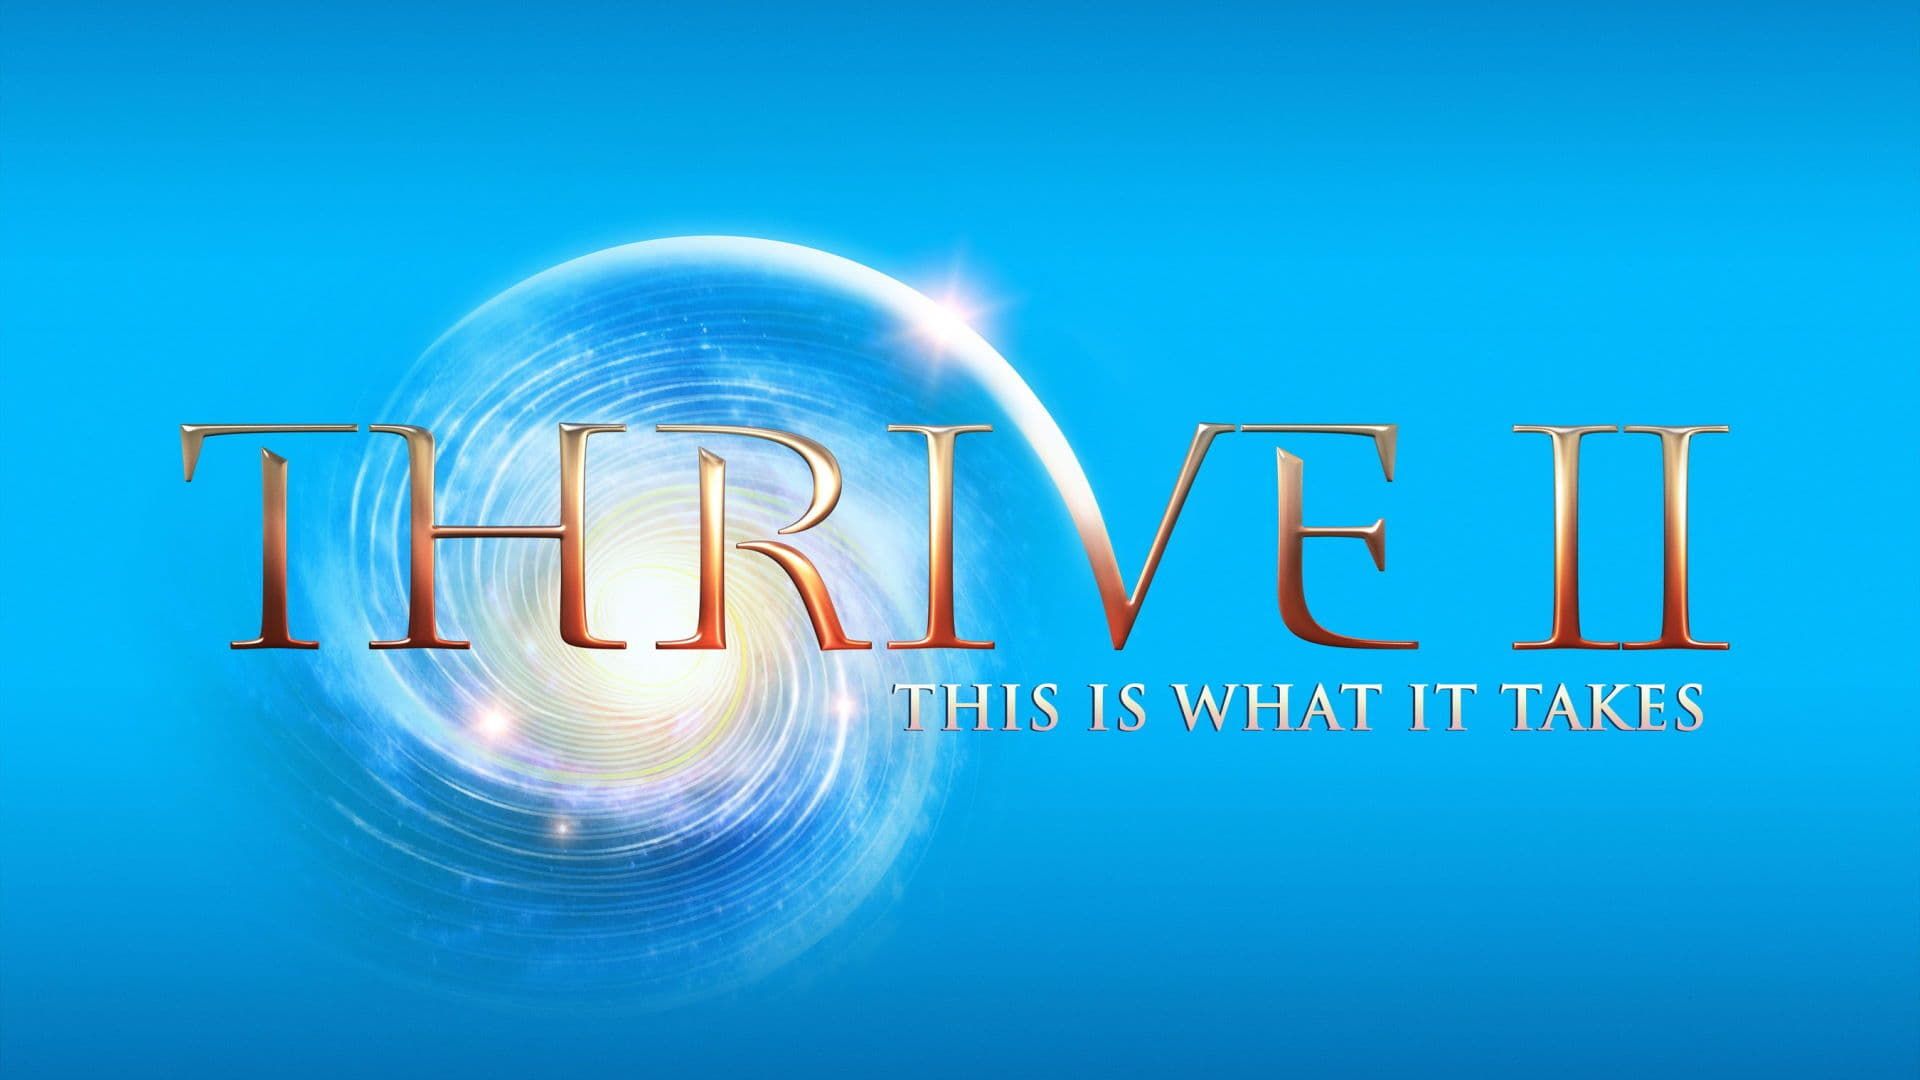 Thrive II: This is What it Takes background